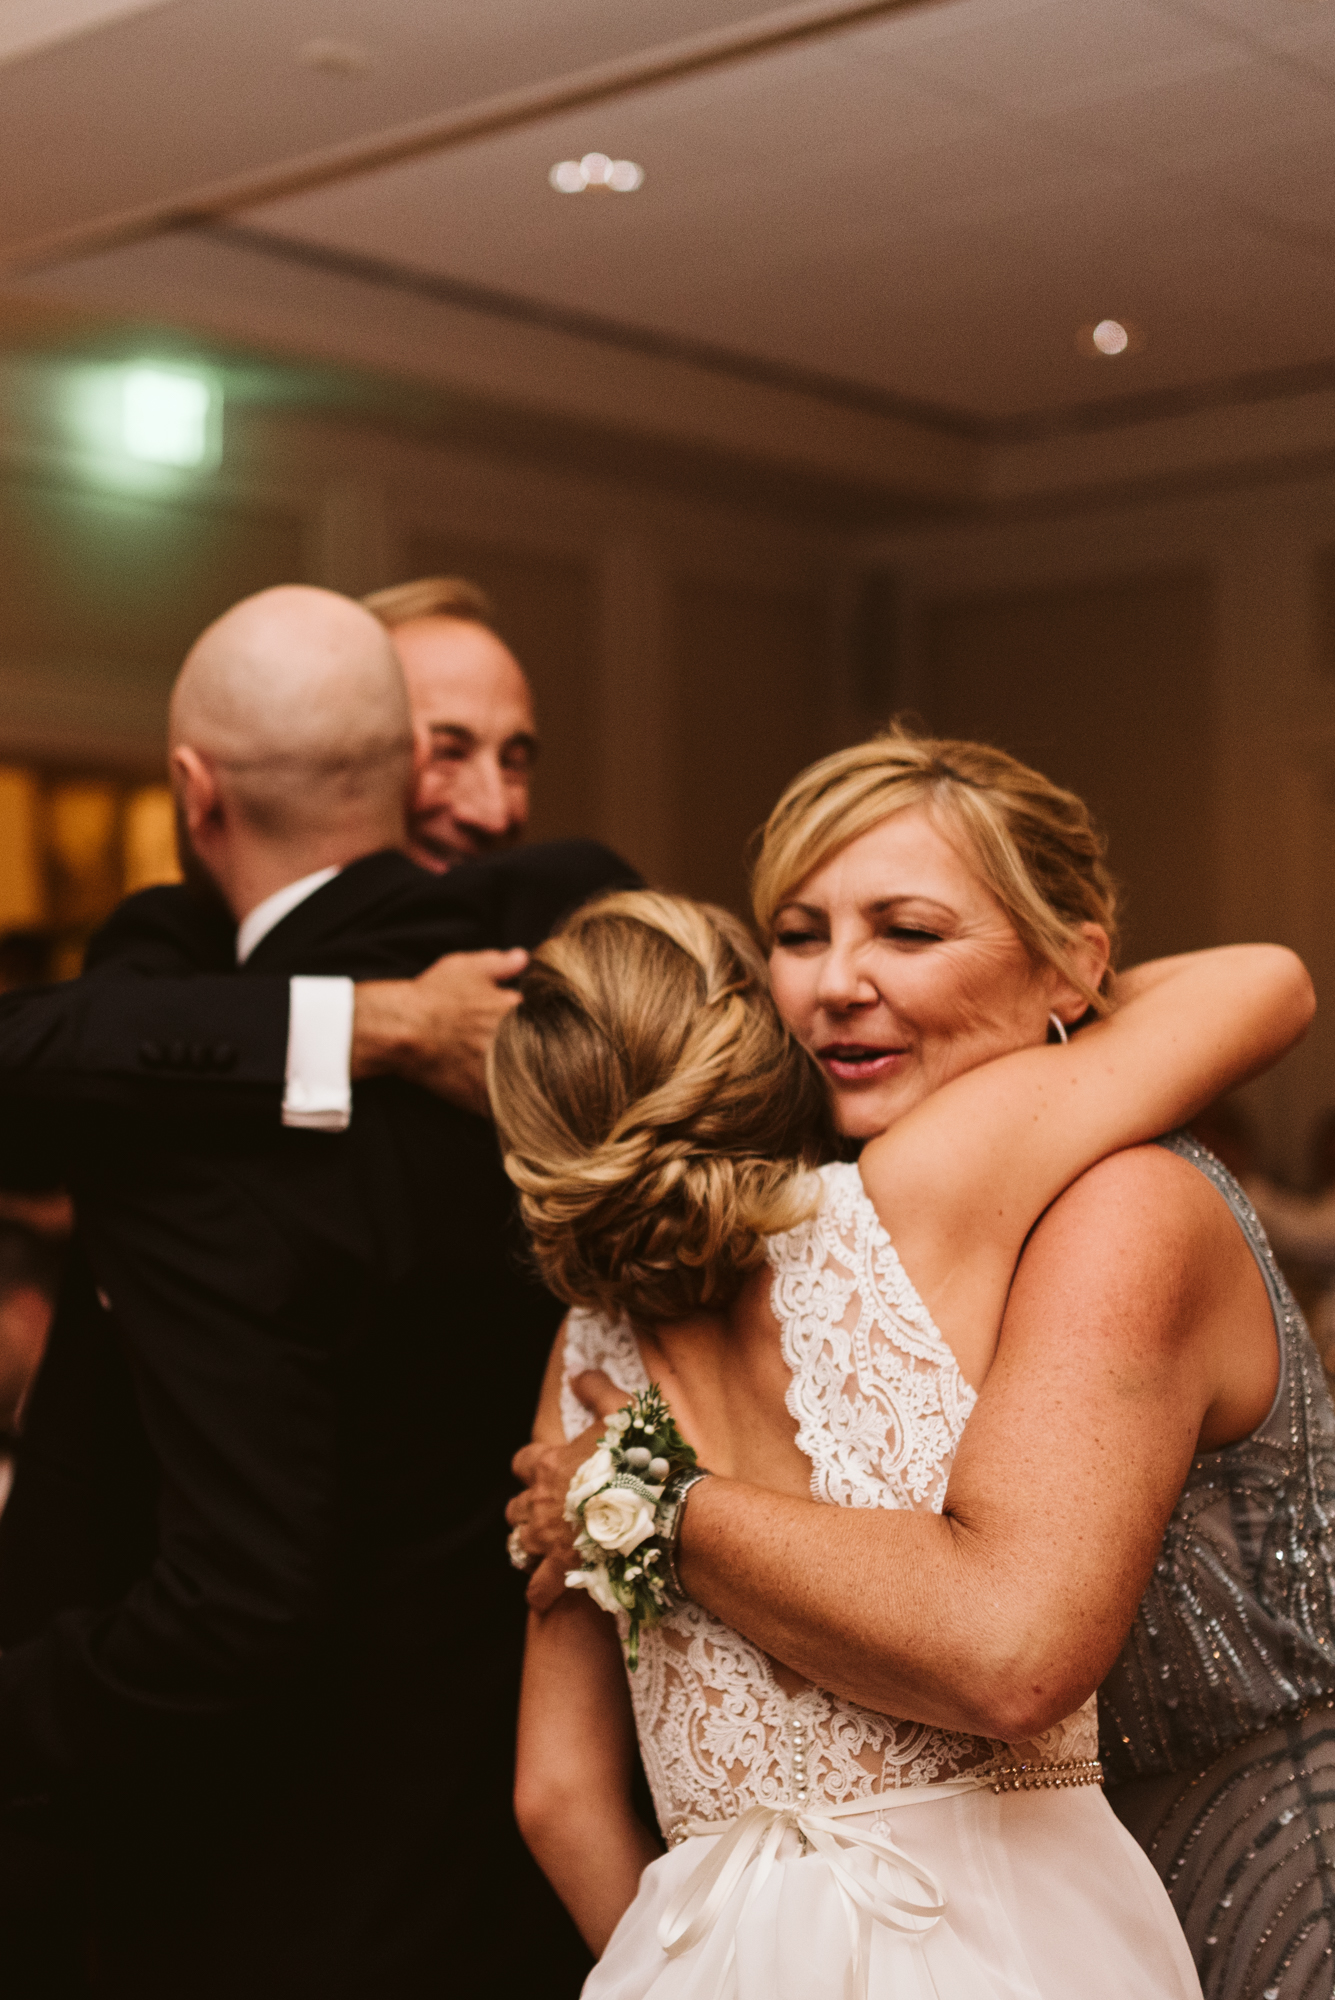 Elegant, Columbia Country Club, Chevy Chase Maryland, Baltimore Wedding Photographer, Classic, Traditional, Bride and Groom Hugging Parents After Toasts, Sweet Hairafter